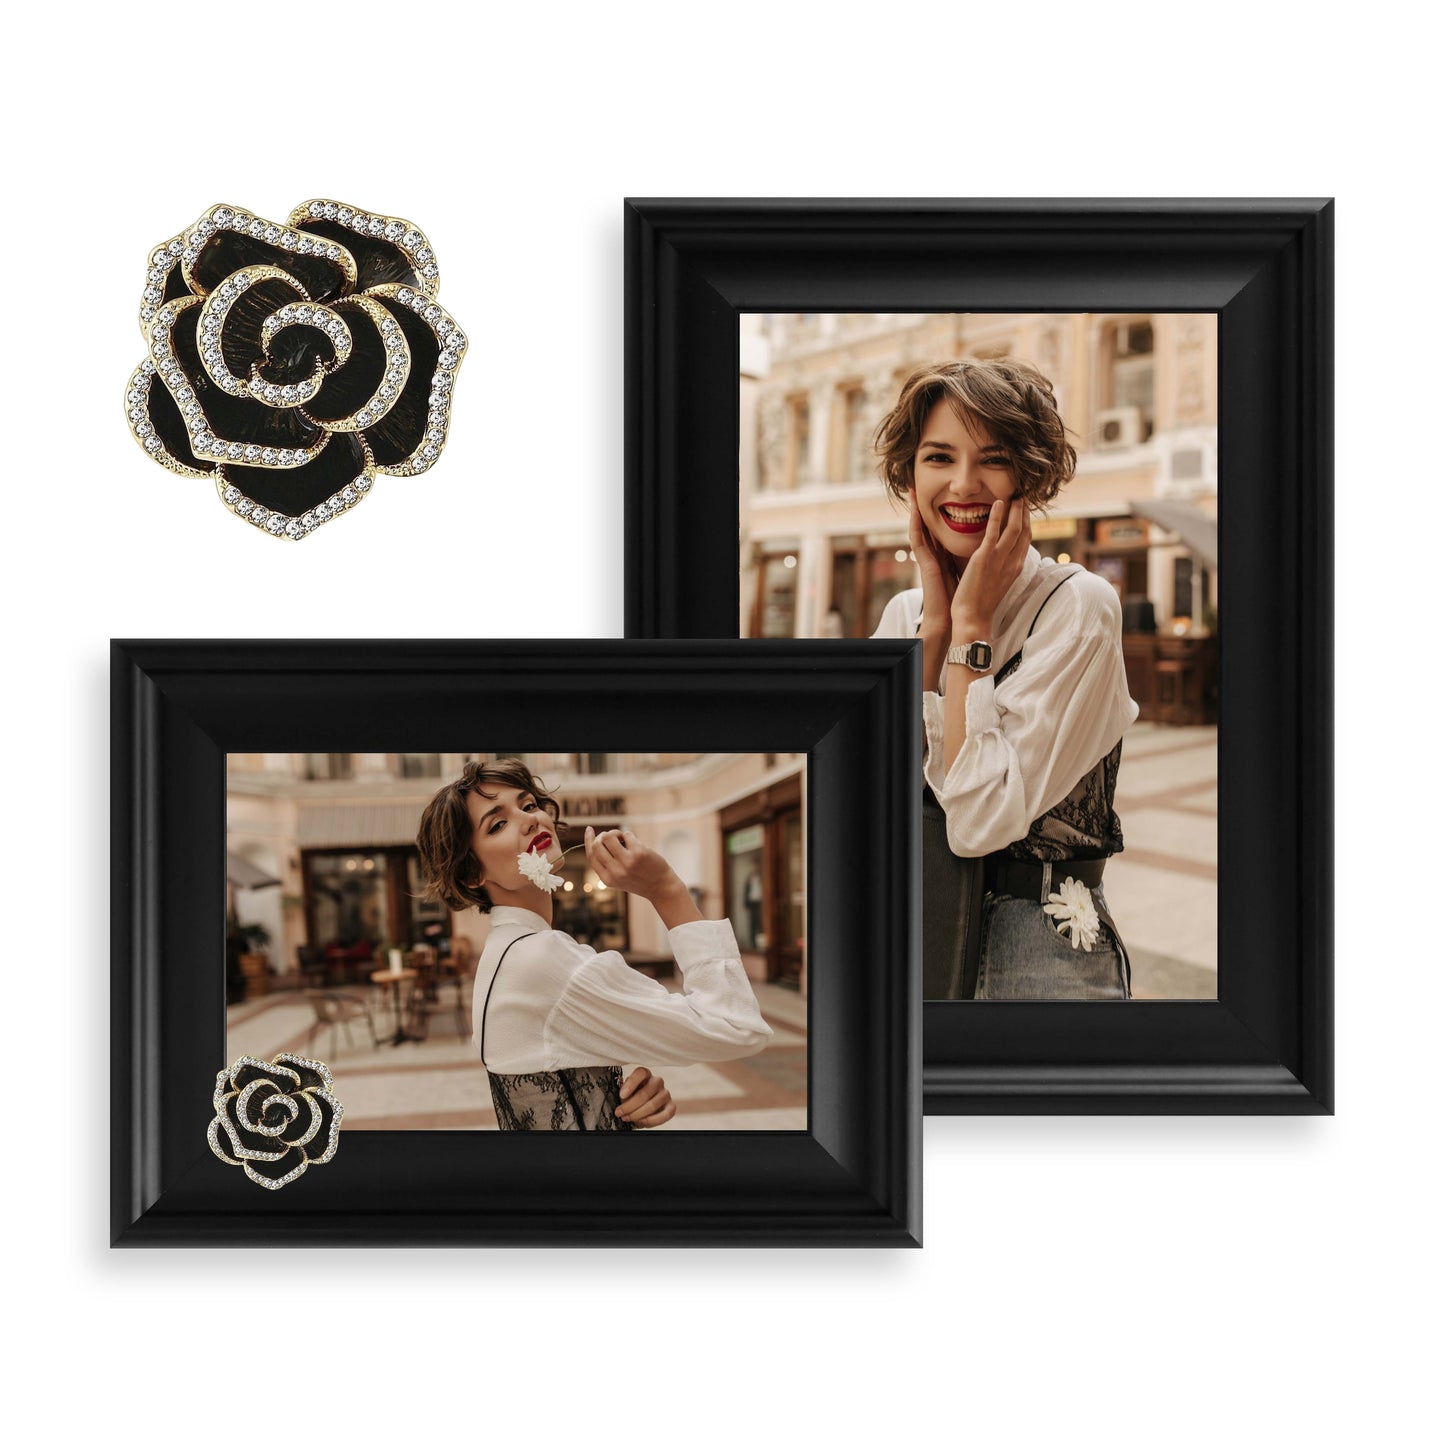 Wall photo frame decoration Dotride 5x7 & 4x6 Picture Frame with a Decoration 2 Pack, Photo Frame with a Detachable Flowers Ornament for Wall and Tabletop Display